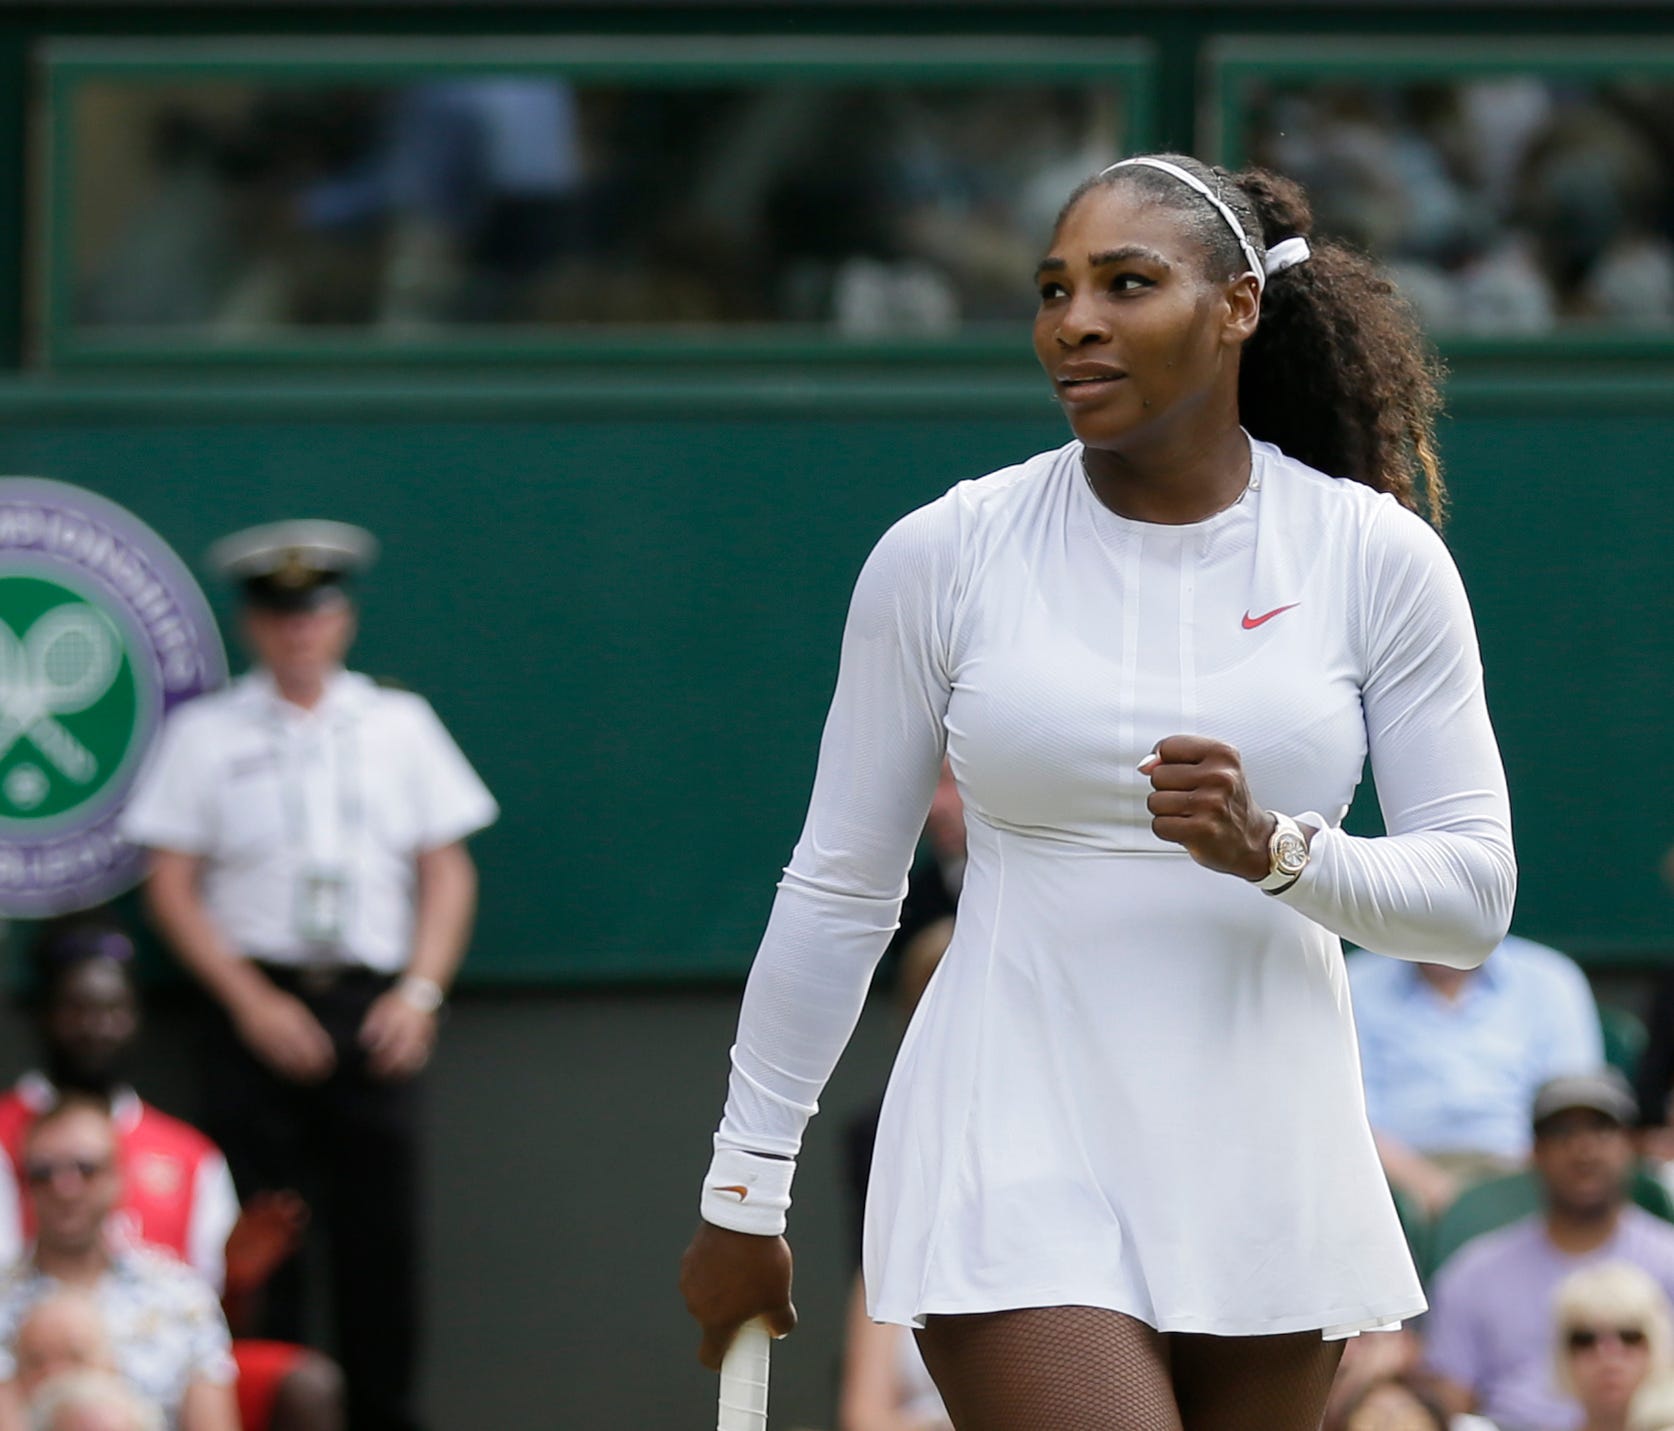 Serena Williams of the United States celebrates winning her women's singles match against Russia's Evgeniya Rodina during the Wimbledon Tennis Championships, in London on July 9.